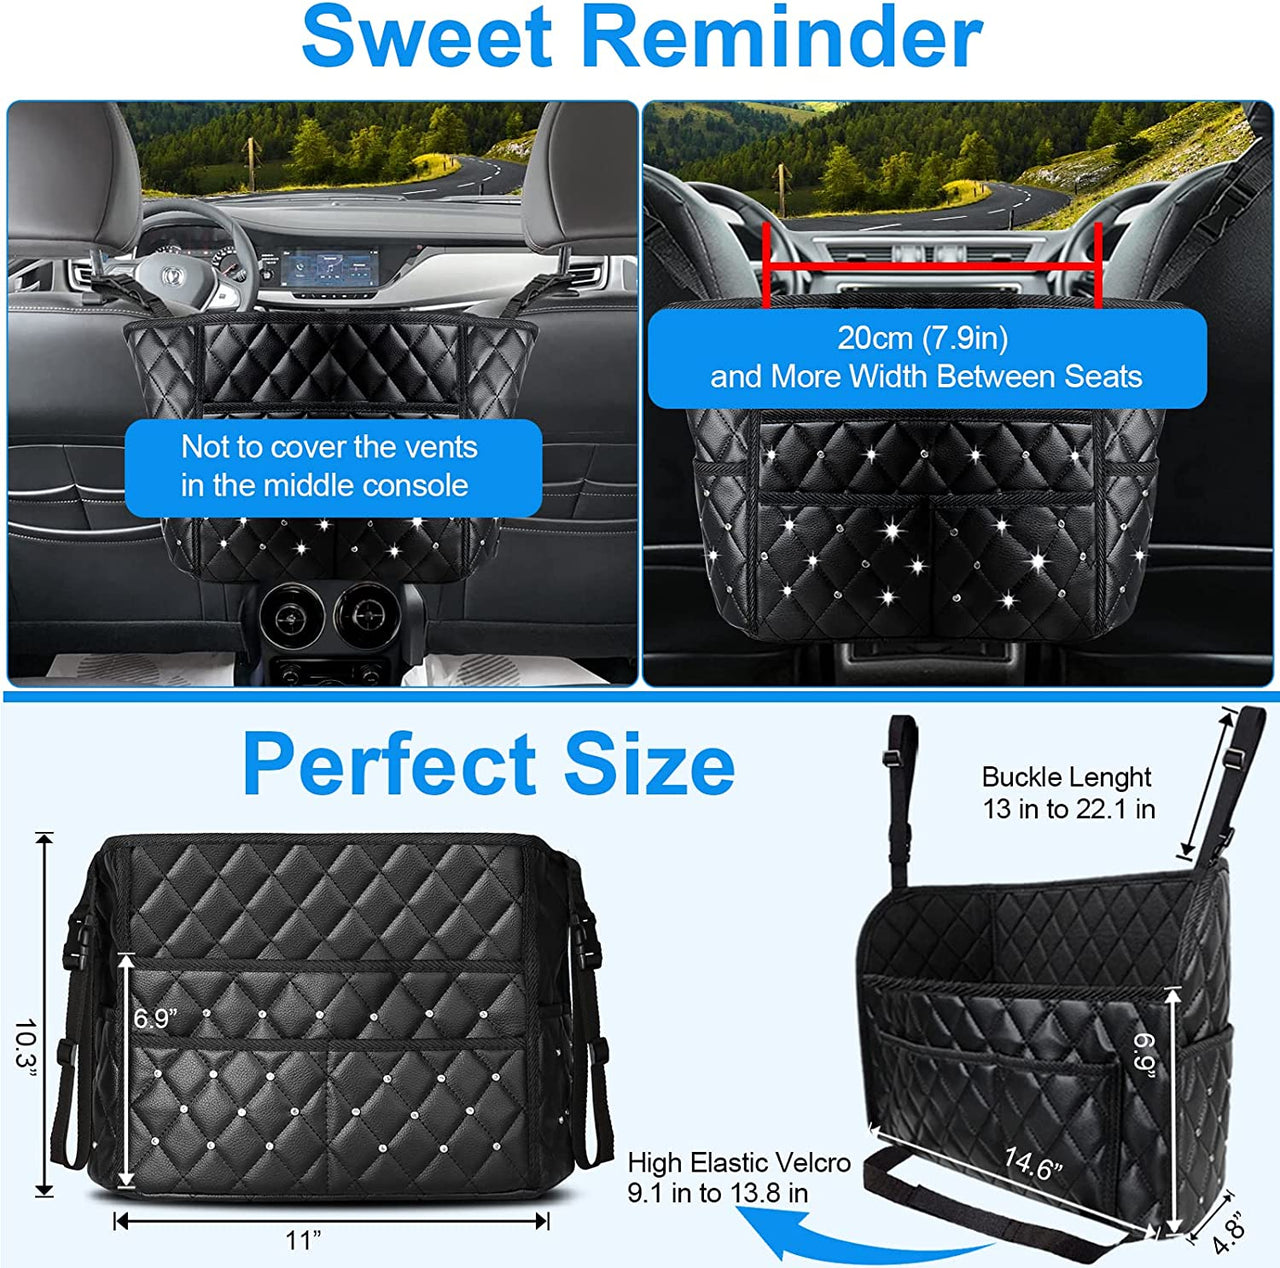 Purse Holder for Cars,Car Purse Handbag Holder Between Seat,PU Leather Car Purse Holder with 7 Extra Pocket,Large Capacity Car Net Bag Organizer Barrier of Back Seat Dog Kids Seat Storage With Diamond, Compatible with All Cars